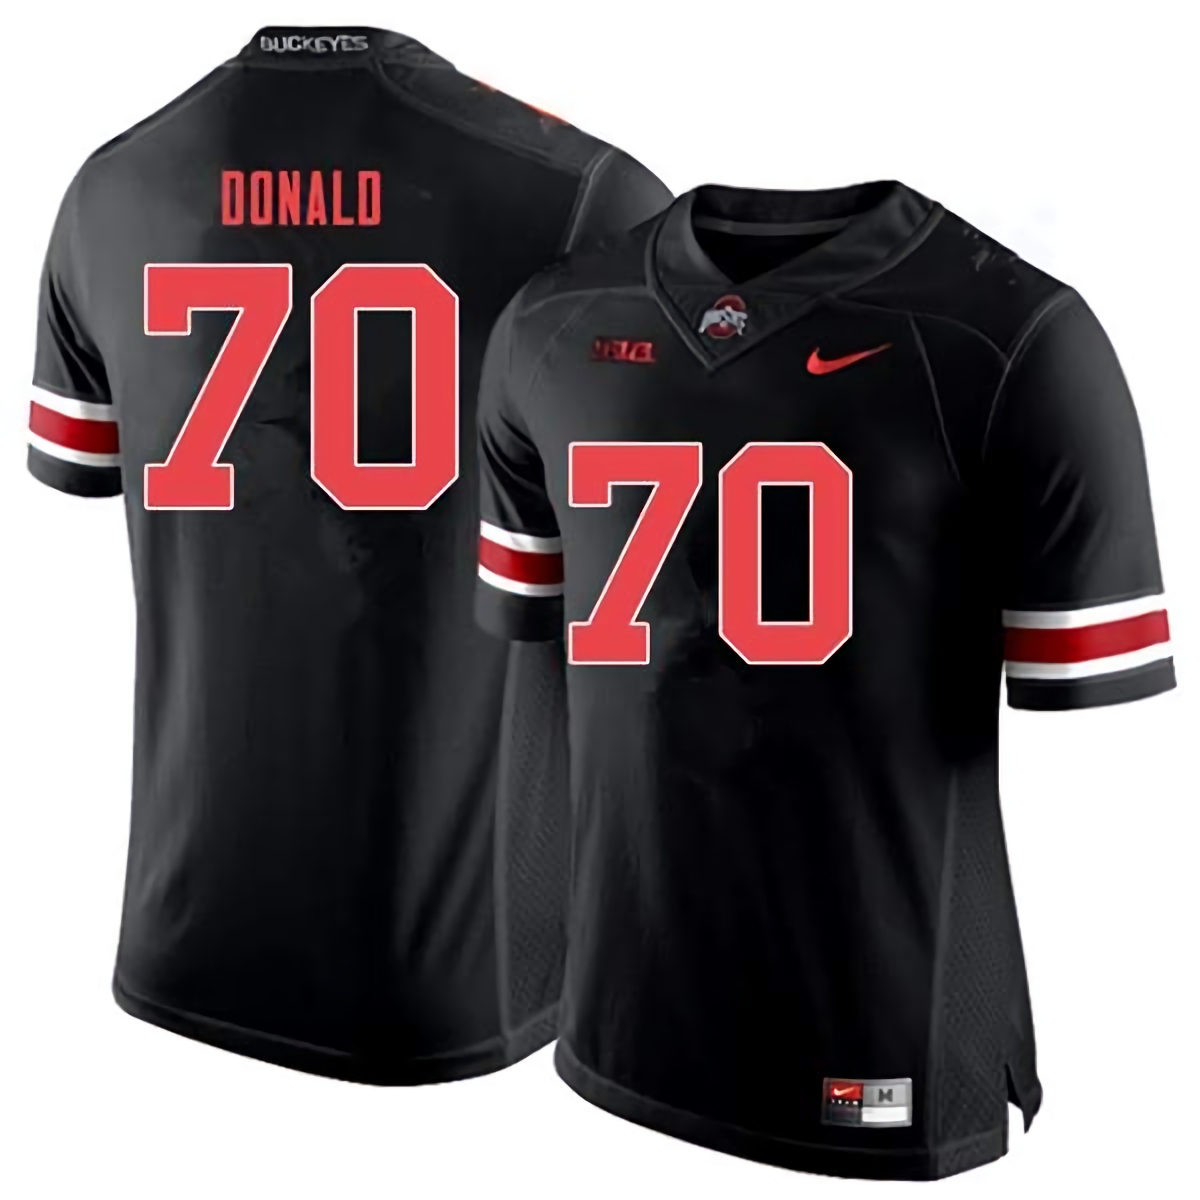 Noah Donald Ohio State Buckeyes Men's NCAA #70 Nike Black Out College Stitched Football Jersey HCF0156QS